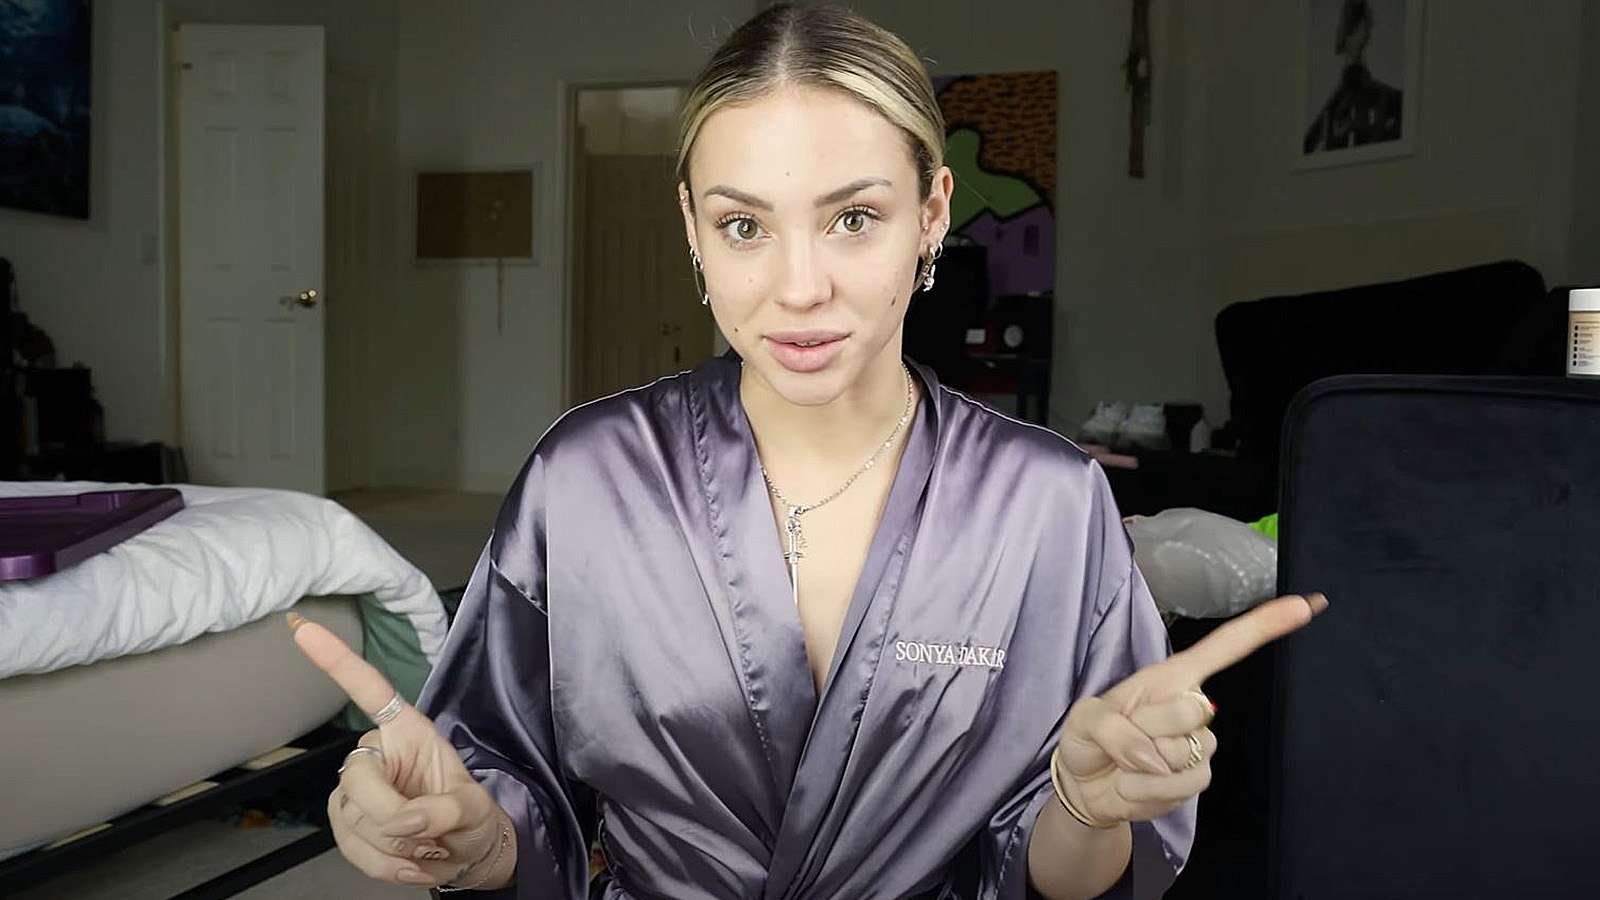 Charly Jordan responds to backlash over allegedly mouthing racial slur